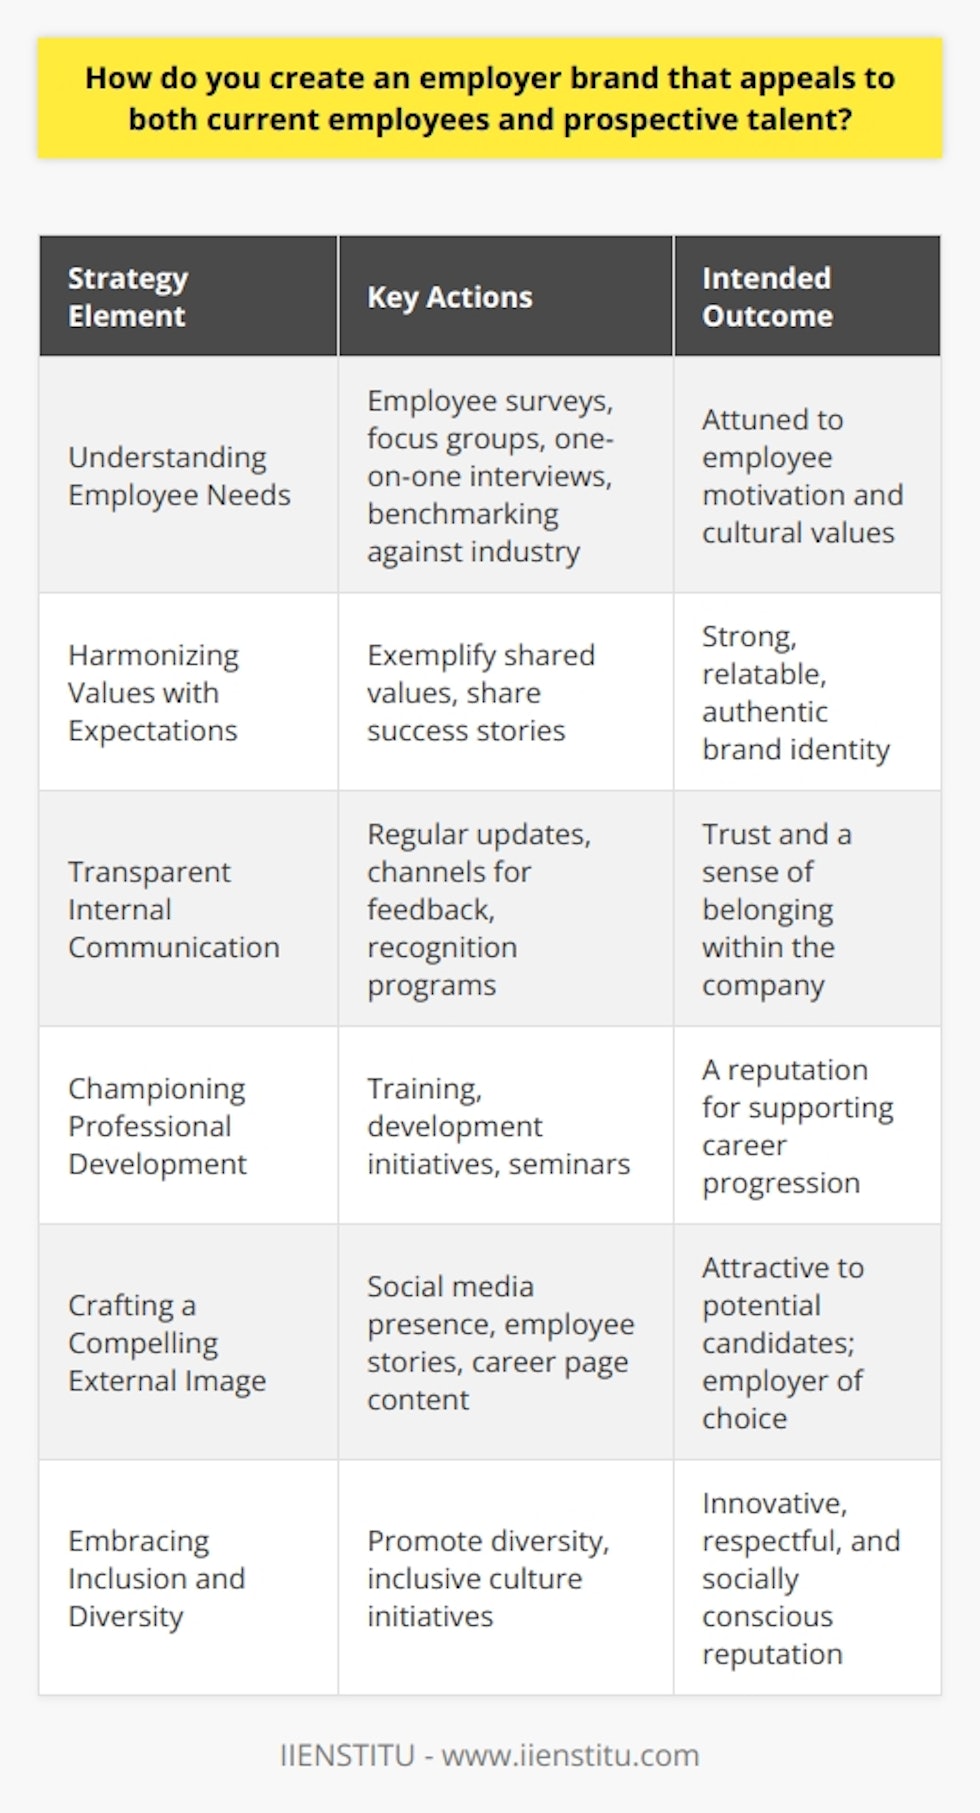 Building an employer brand that captivates both current employees and potential recruits requires a tailored strategy that addresses the multifaceted aspects of the workplace experience. **Understanding Employee Needs and Aspirations**To truly connect with both existing and future members of your organization, you must delve into their unique needs and career aspirations. Initiatives like comprehensive employee surveys, intimate focus groups, and in-depth one-on-one interviews are instrumental in gathering valuable data. This data can reveal what motivates your staff and what they cherish about your company culture. Moreover, a comparative analysis with competitors and industry standards can offer a clear vantage point for identifying opportunities to elevate your employer brand.**Harmonizing Company Values with Employee Expectations**An employer brand that resonates with its workforce is anchored in a foundation of shared values. Consistently exemplifying these values—and broadcasting success stories that illustrate their impact—cements a relatable and authentic employer brand. By embedding these principles into the daily operations and fabric of company culture, organizations can instill a sense of purpose that radiates to potential candidates.**Fostering Transparent Internal Communication**A culture of transparency and open dialogue is crucial for a fortified employer brand. Regularly communicating the organization's aspirations and milestones engenders trust, while creating avenues for feedback empowers employees to contribute to the company’s direction. Recognizing and celebrating team members' successes reinforces their value to the company and nurtures a deep sense of belonging.**Championing Professional Development** Dedication to the continual professional growth of employees can dramatically strengthen an organization's standing as a coveted workplace. Facilitating robust training opportunities, development initiatives, and skill-enhancing seminars signals to employees that their career progression is a top priority. A culture that prizes ongoing learning and development is magnetic to those seeking a nurturing and forward-looking work environment.**Crafting a Compelling External Image**Your external representation as an employer is a lightning rod for attracting top-notch talent. Platforms like social media, online industry communities, and company career pages are effective tools for broadcasting your employer brand. Authentic employee stories, glimpses into company life, and shared successes make your organization tangible and inviting to job seekers.**Embracing Inclusion and Diversity**A commitment to crafting an inclusive culture, where diversity is not just acknowledged but celebrated, can tremendously expand your appeal as an employer. A workplace that welcomes varied backgrounds promotes innovation and signals to potential hires a respect for equality and social consciousness. By elevating the narrative of diversity, your employer brand becomes synonymous with a progressive, equitable, and dynamic work environment.In essence, sculpting an employer brand that appeals to both the heart and mind of current and prospective employees involves a comprehensive approach. By blending an empathetic understanding of employee needs with actionable strategies that promote shared values, transparent communication, pathways for growth, a vibrant external narrative, and a commitment to inclusivity, you can cultivate an employer brand that is as resilient as it is attractive.